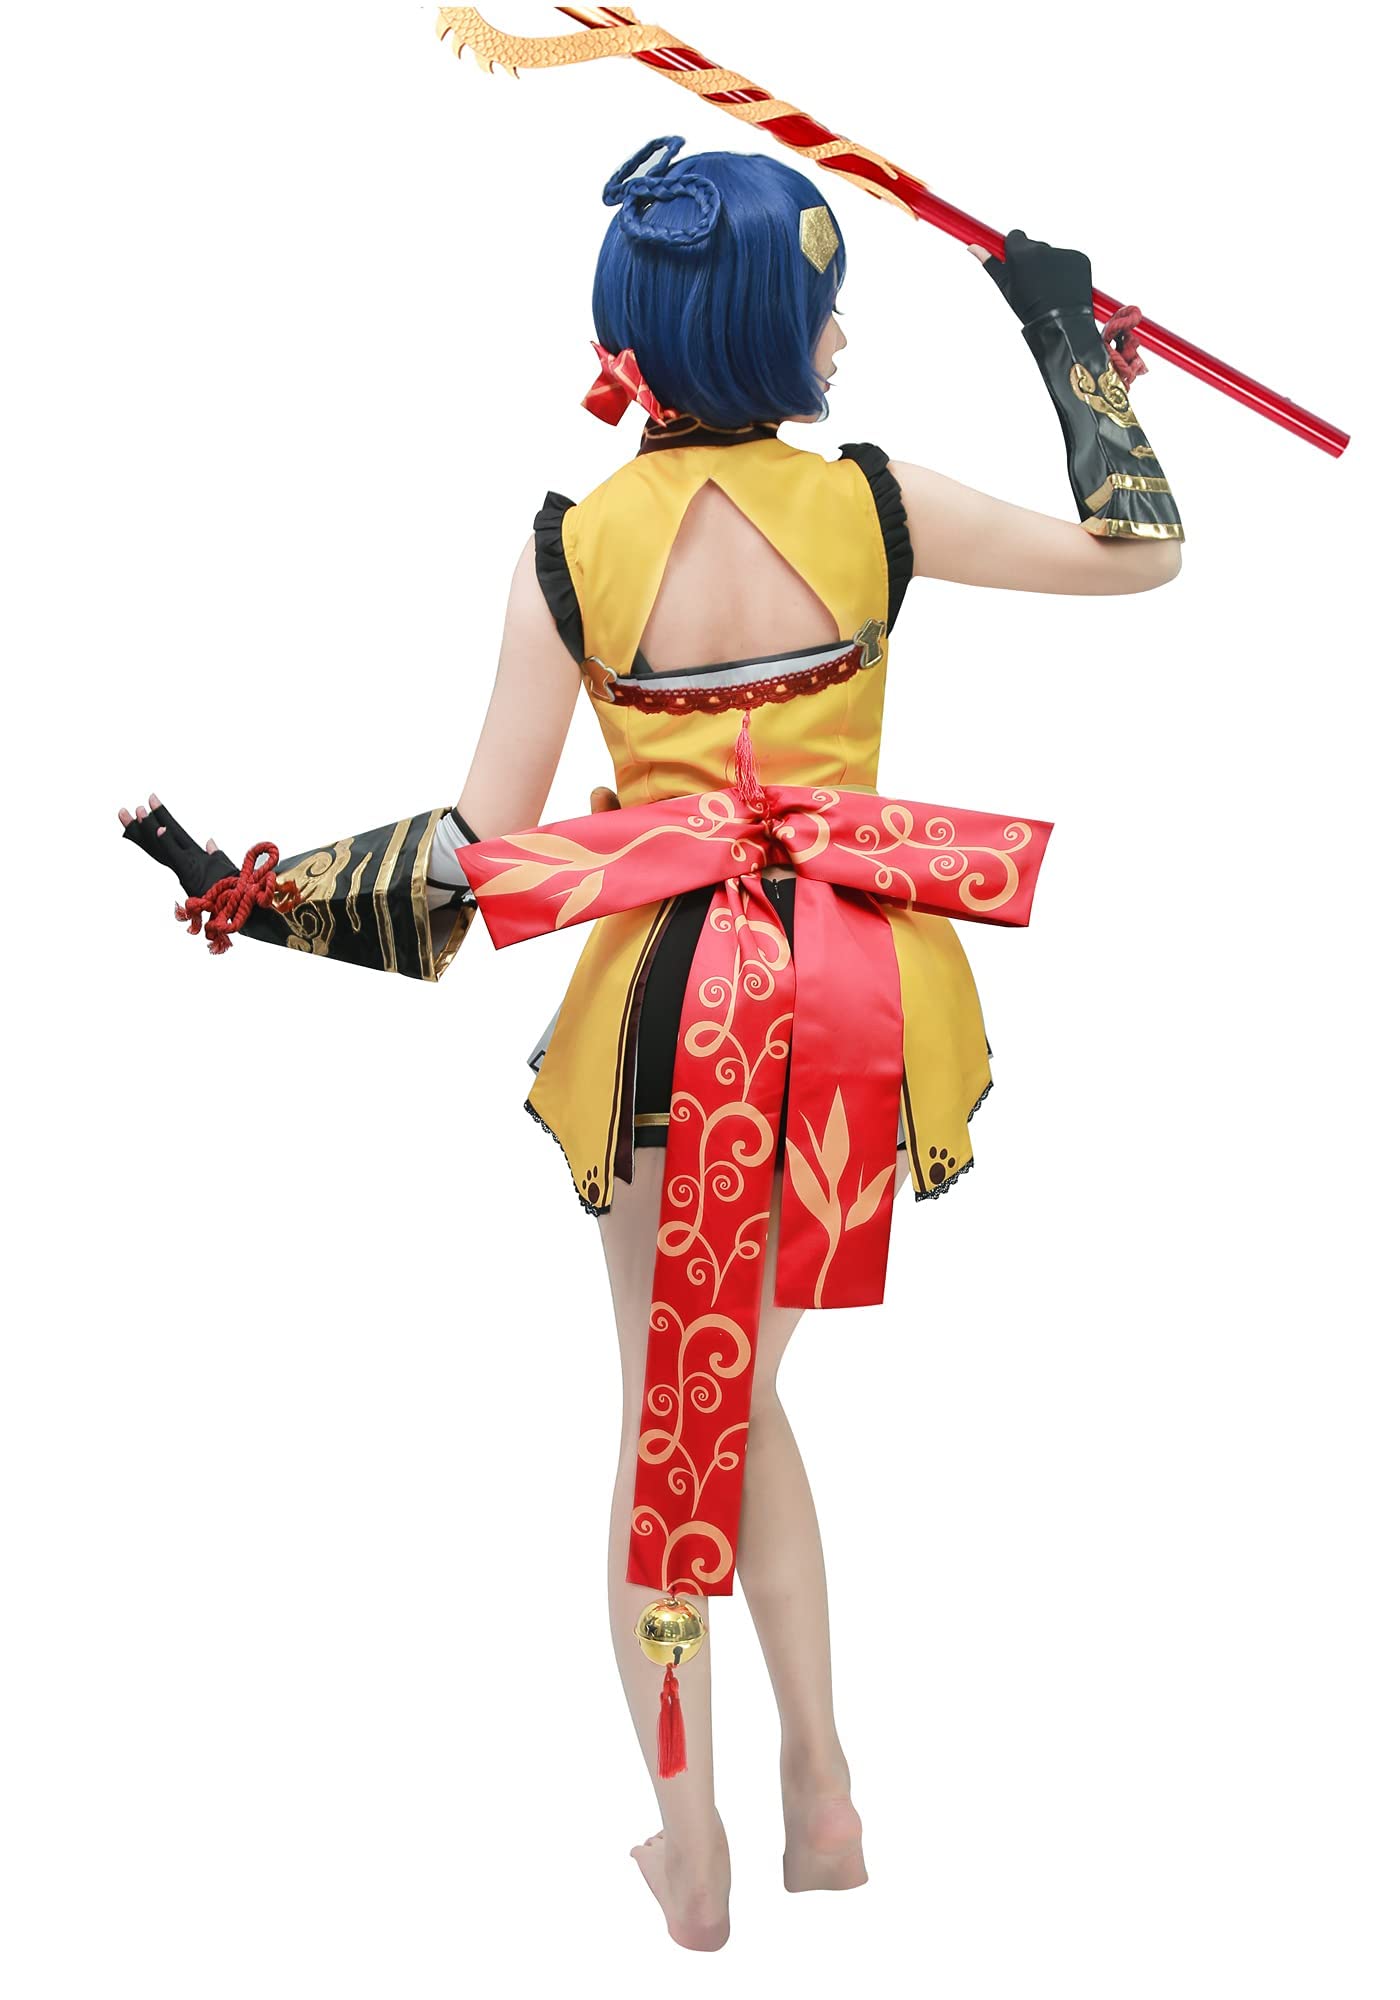 DAZCOS Women Xiangling Cosplay Costume Outfit with Belt and Gloves